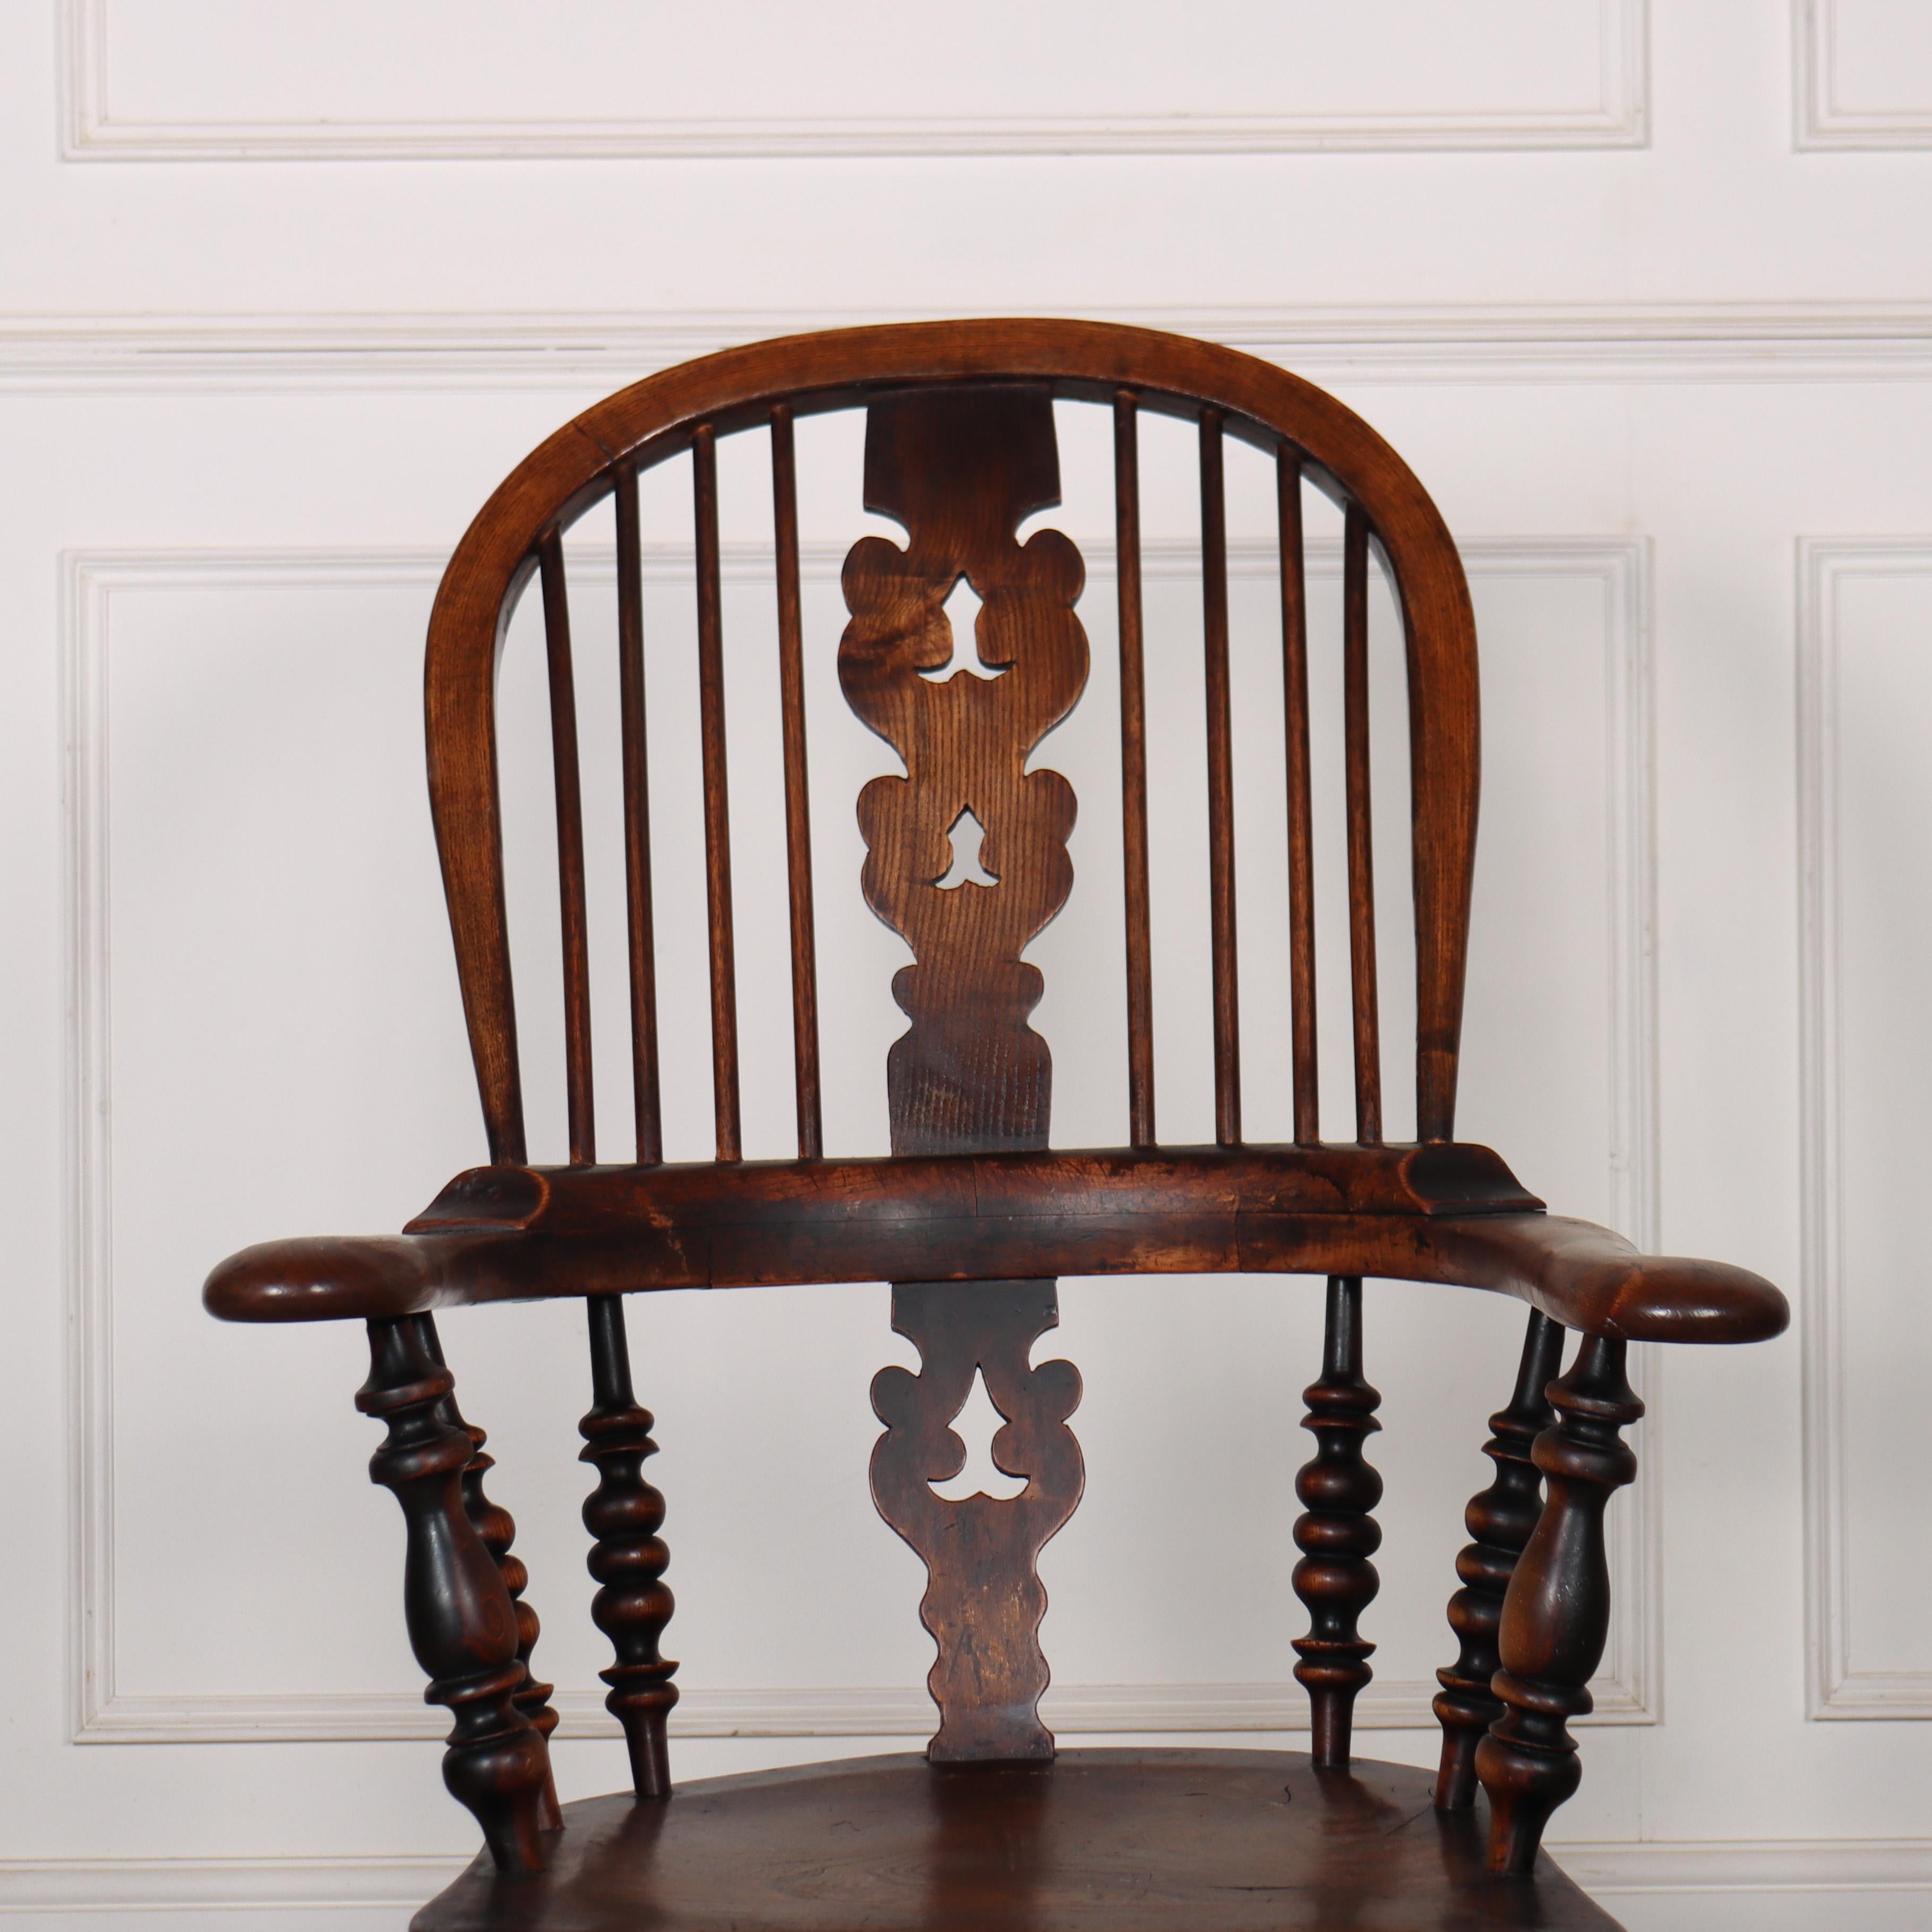 19th C Yorkshire beech and elm broad arm windsor chair. 1850.

Seat depth is 16 inches, seat height is 17.5 inches

Reference: 8128

Dimensions
25.5 inches (65 cms) Wide
26.5 inches (67 cms) Deep
44.5 inches (113 cms) High